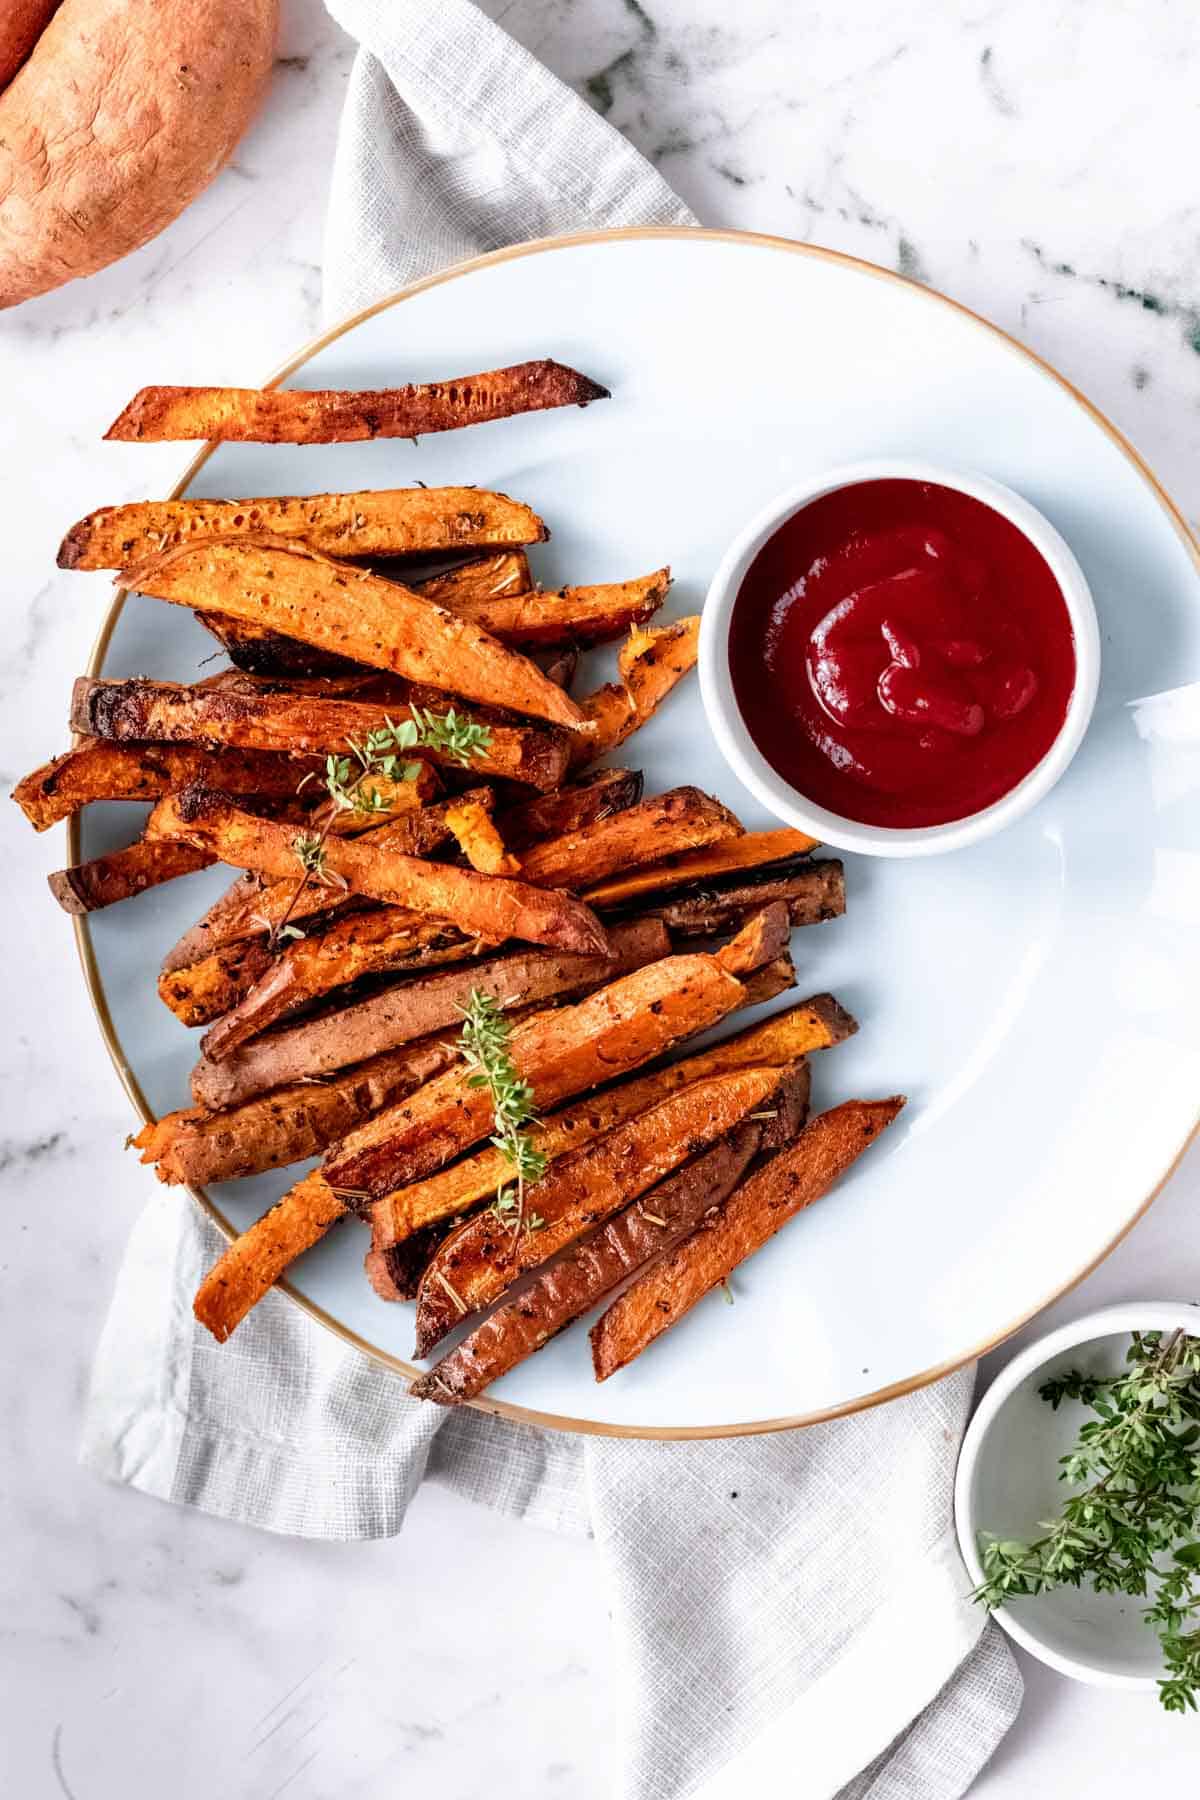 Overhead view of Herbes de Provence baked sweet potato fries on a white plate next to a bowl of ketchup.